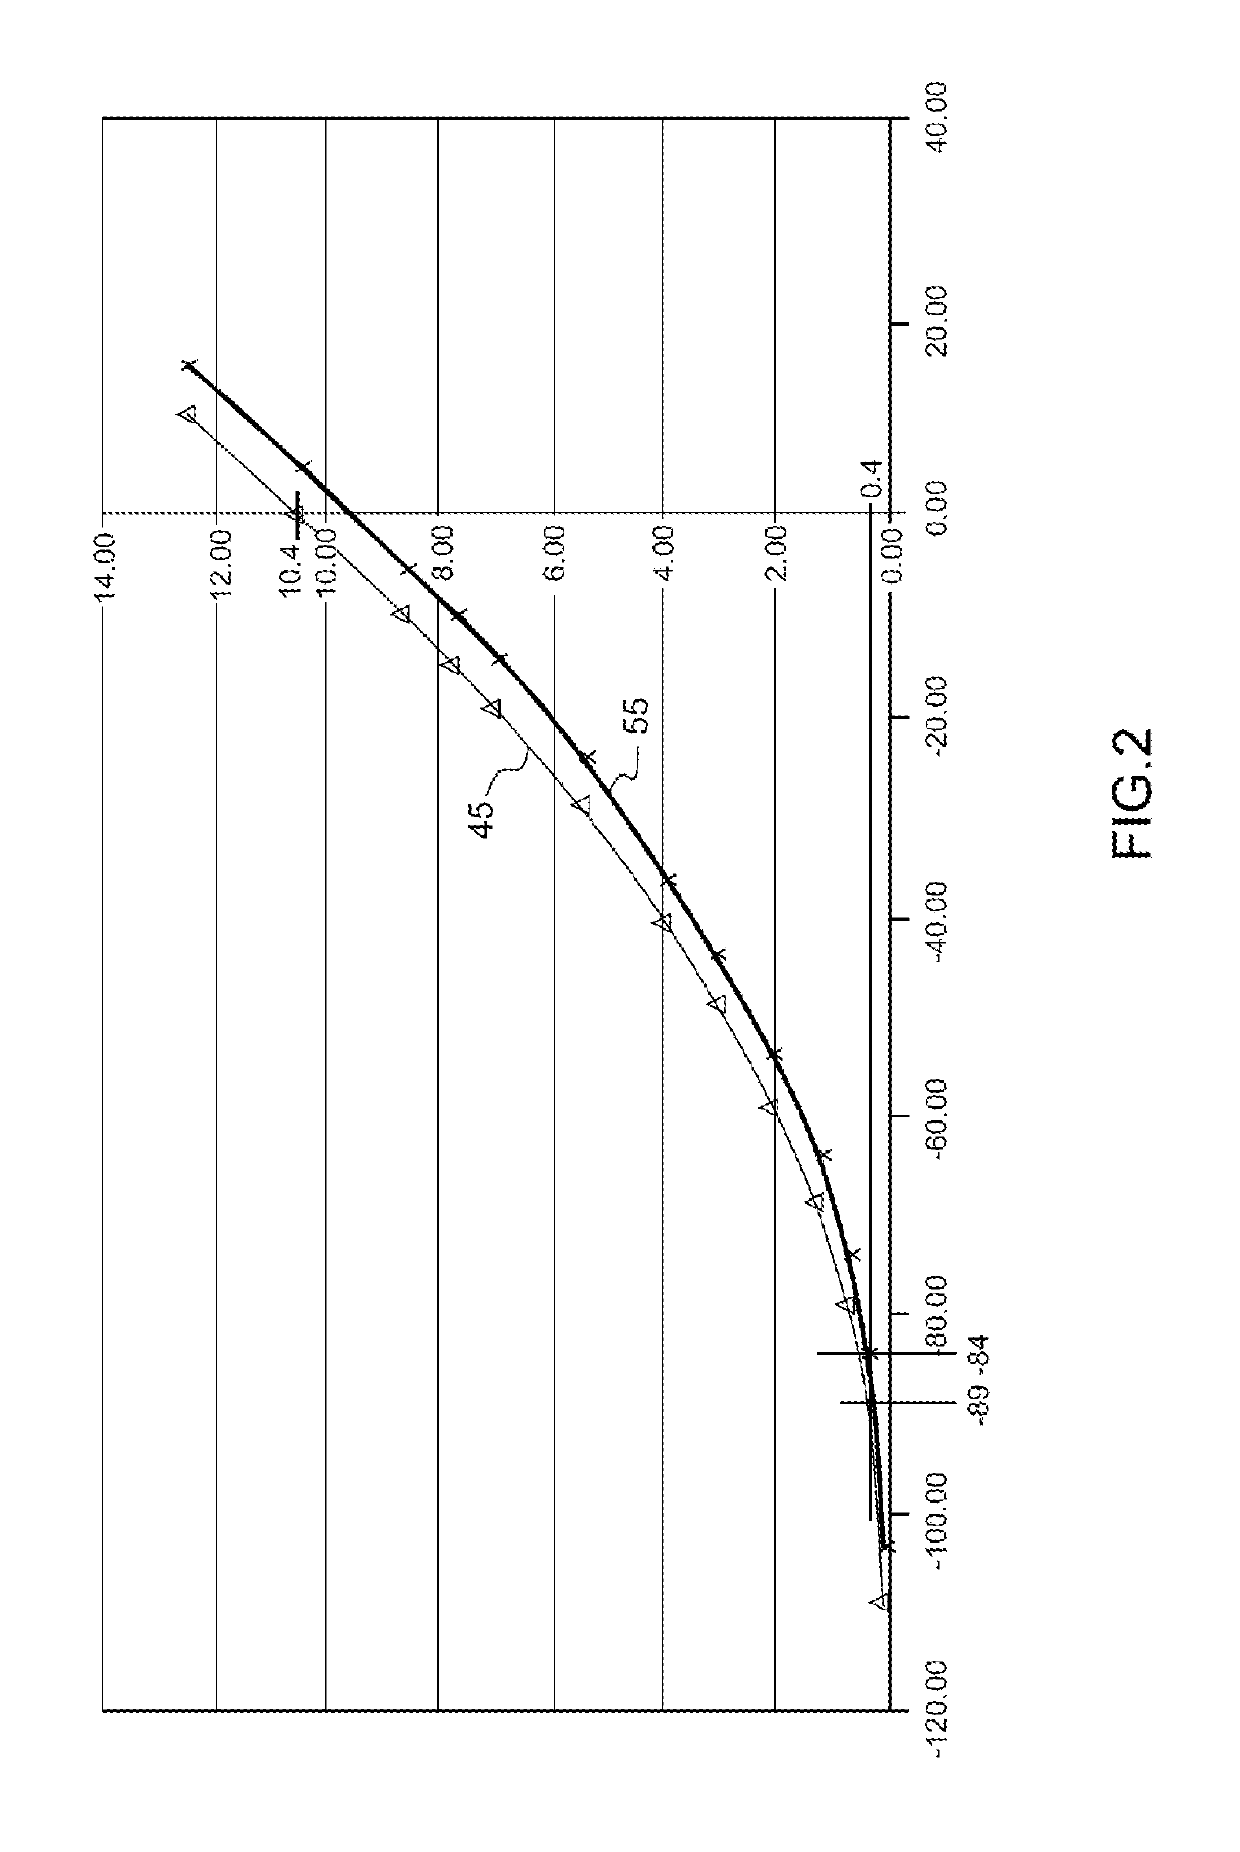 Equilibration of a multibeam inductive output tube